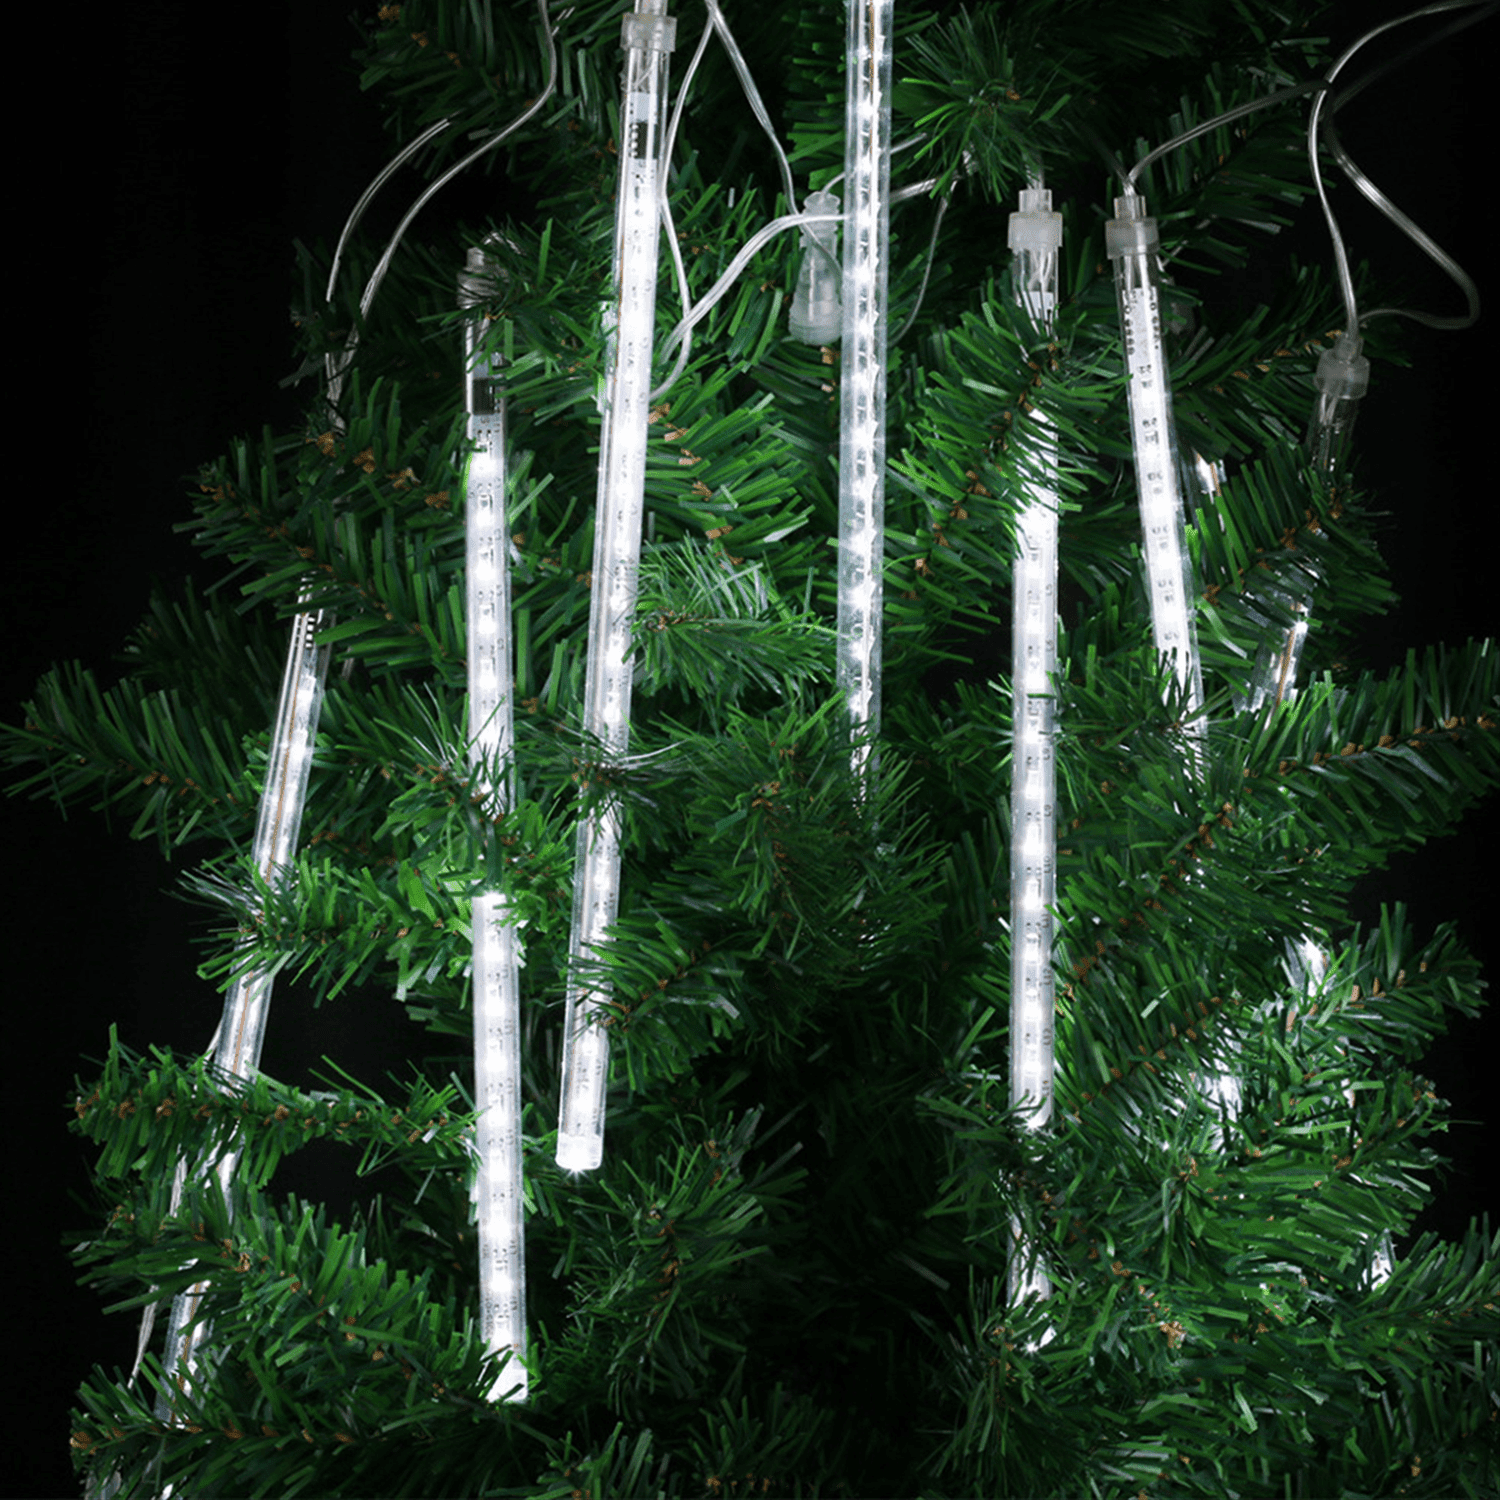 Details about   144LED Waterproof Lights Meteor Shower Rain 8 Tube Tree Outdoor Light Xmas Decor 